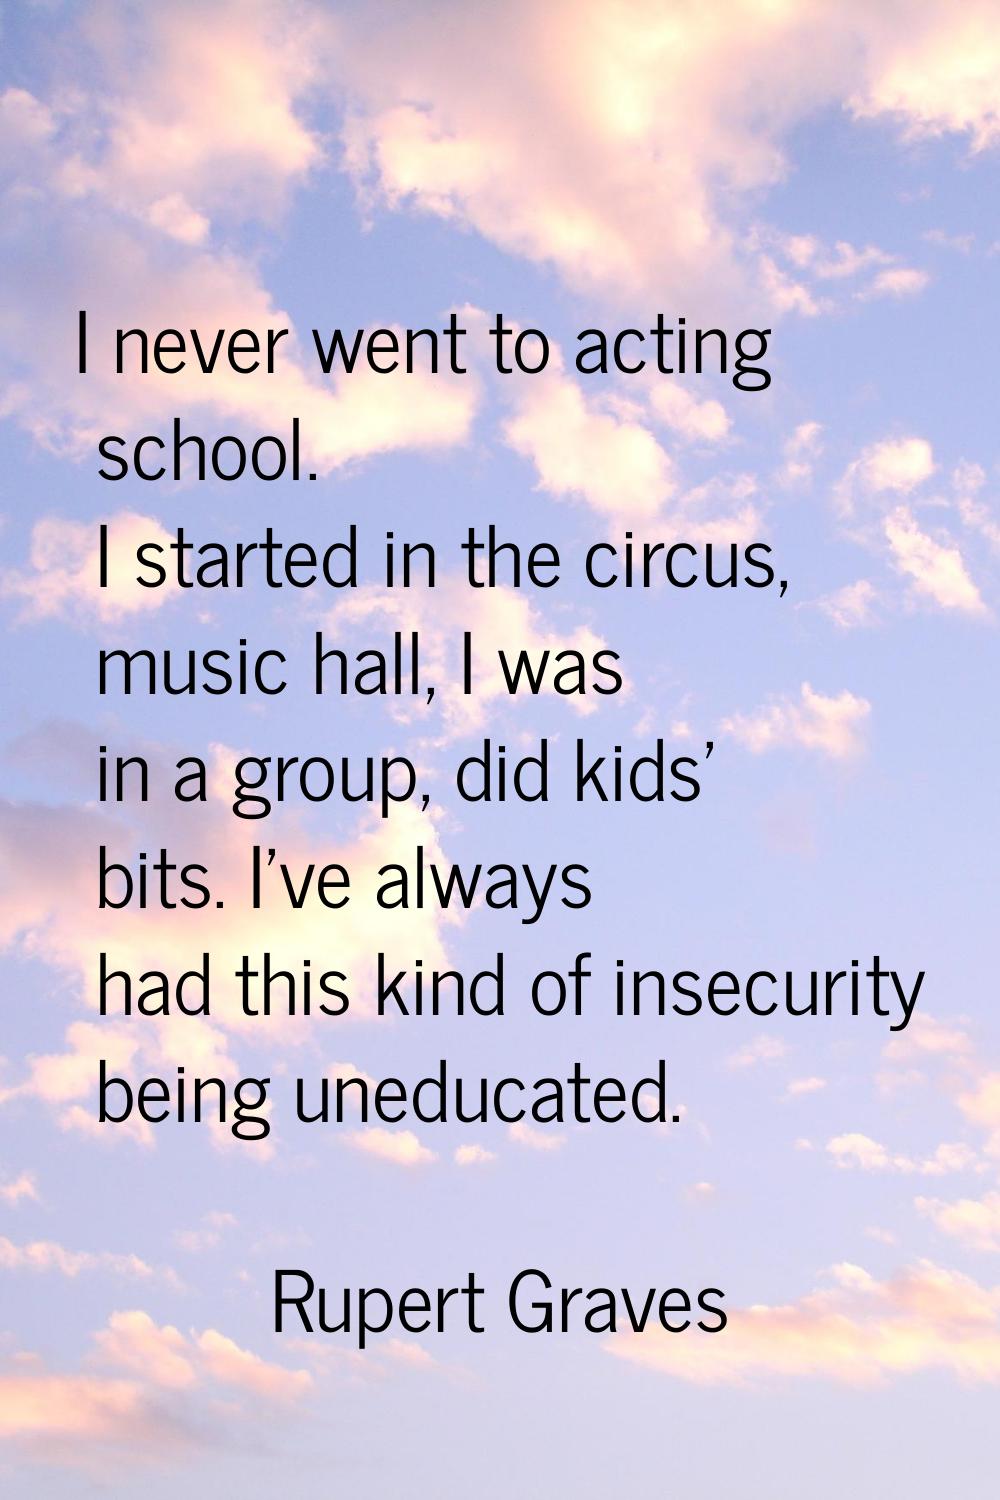 I never went to acting school. I started in the circus, music hall, I was in a group, did kids' bit